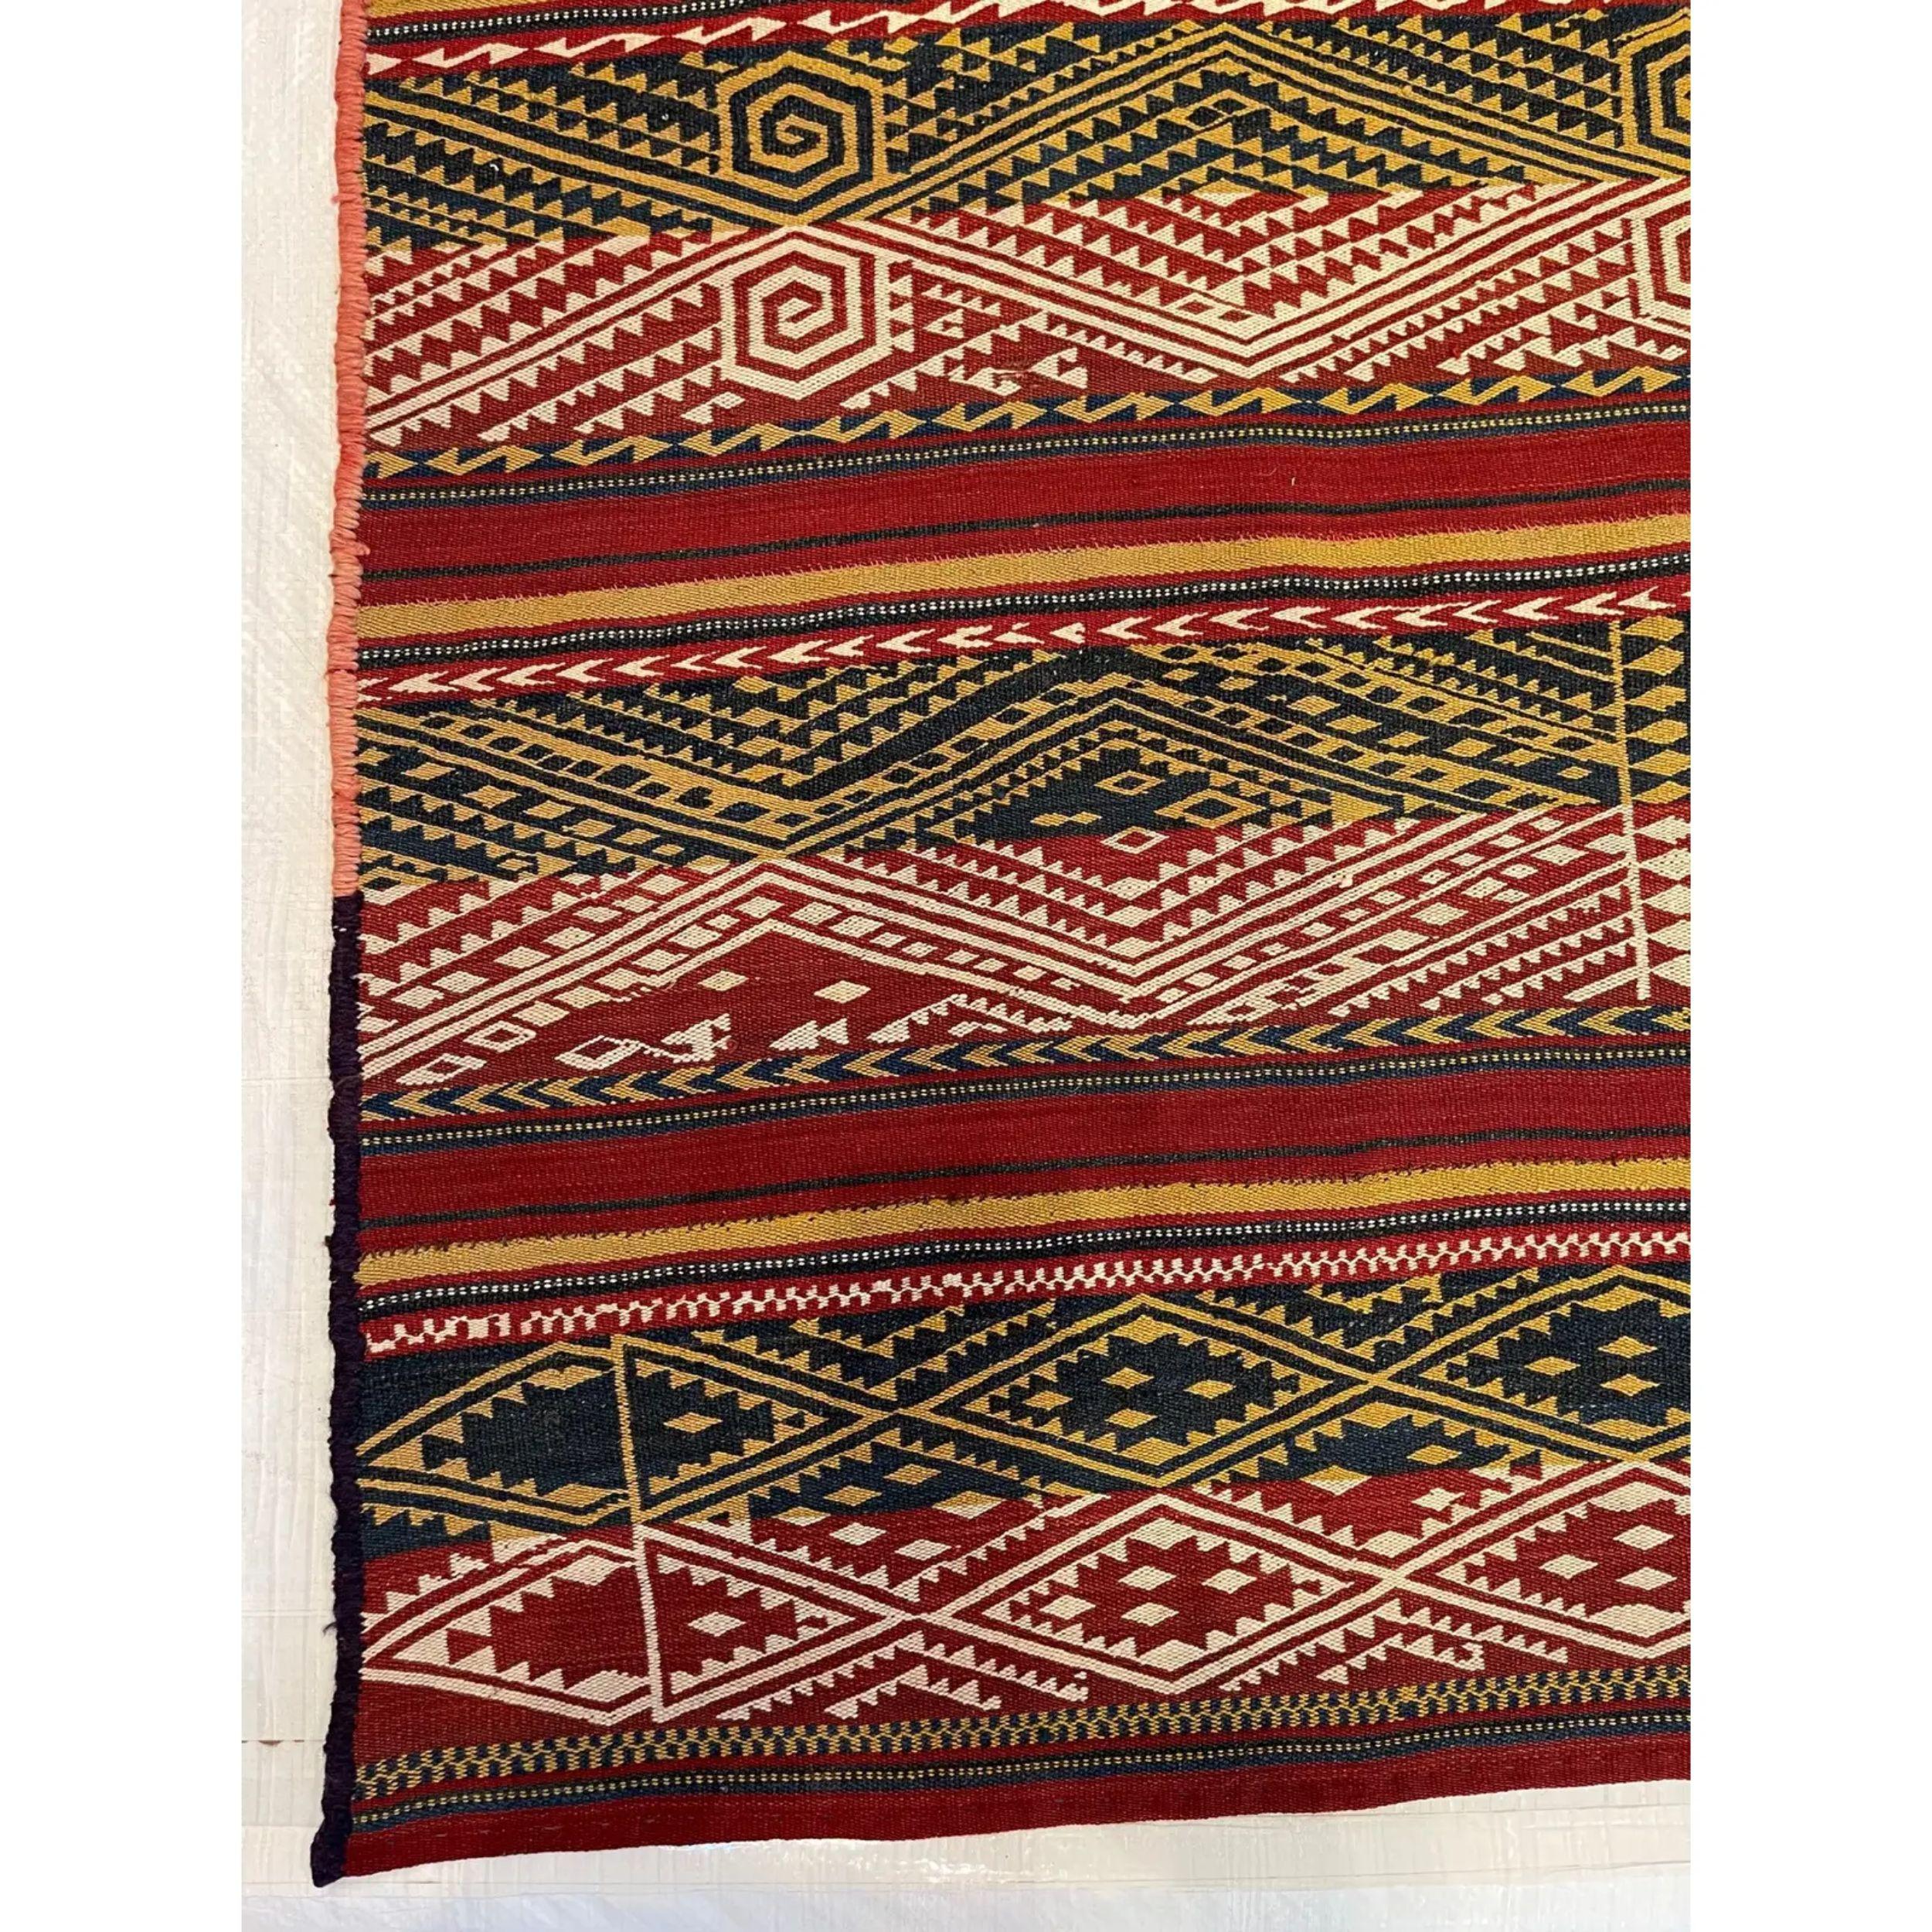 Antique Kilim Geometric Design Rug 10' X 6'1' In Good Condition For Sale In Los Angeles, US